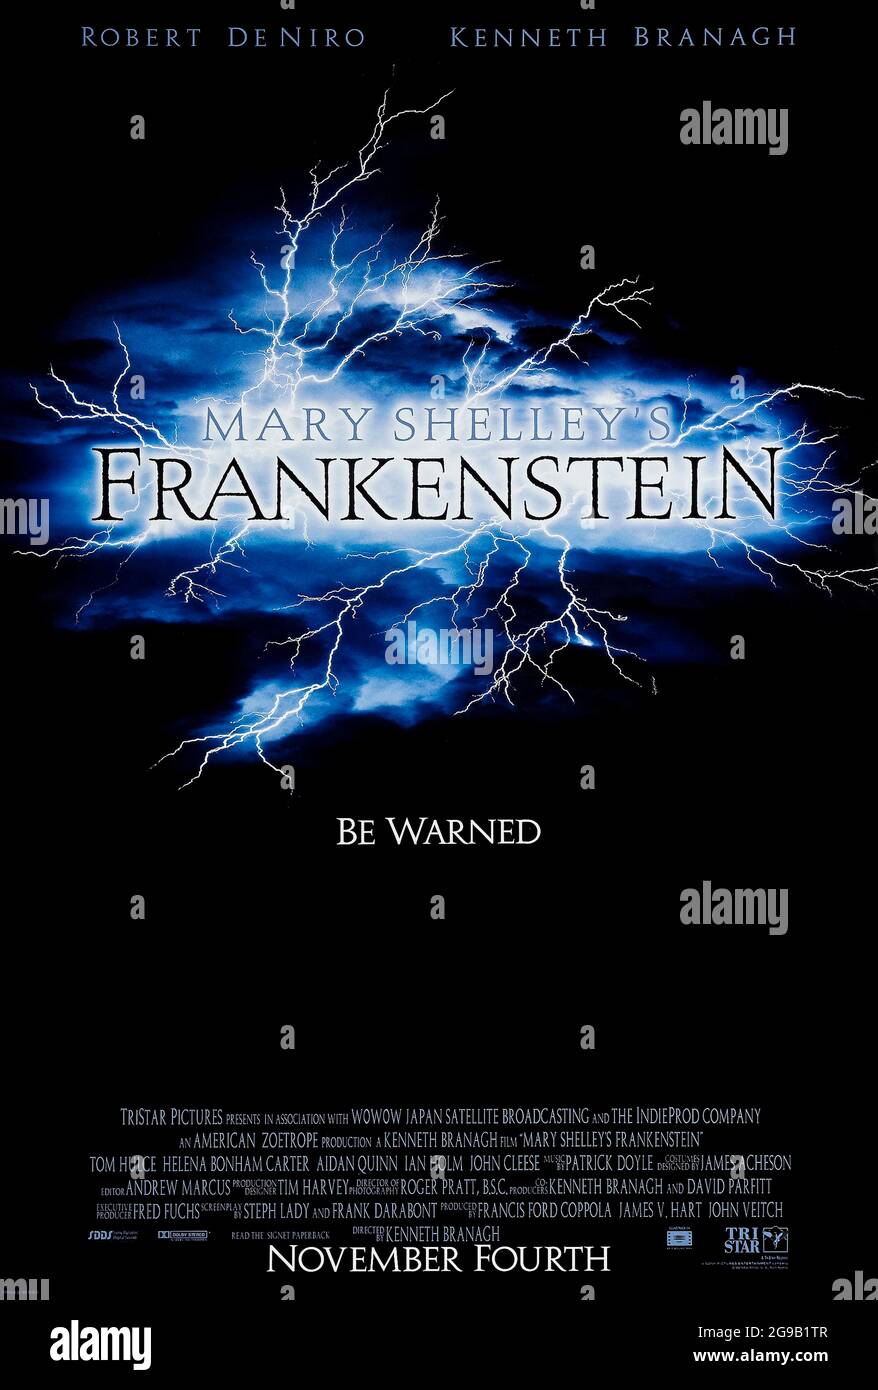 Mary Shelley's Frankenstein (1994) directed by Kenneth Branagh and starring Robert De Niro, Kenneth Branagh, Helena Bonham Carter and Tom Hulce. Big screen adaptation of Mary Shelley's novel about a scientist Dr. Victor Frankenstein who creates an artificial man out to revenge his creator. Stock Photo